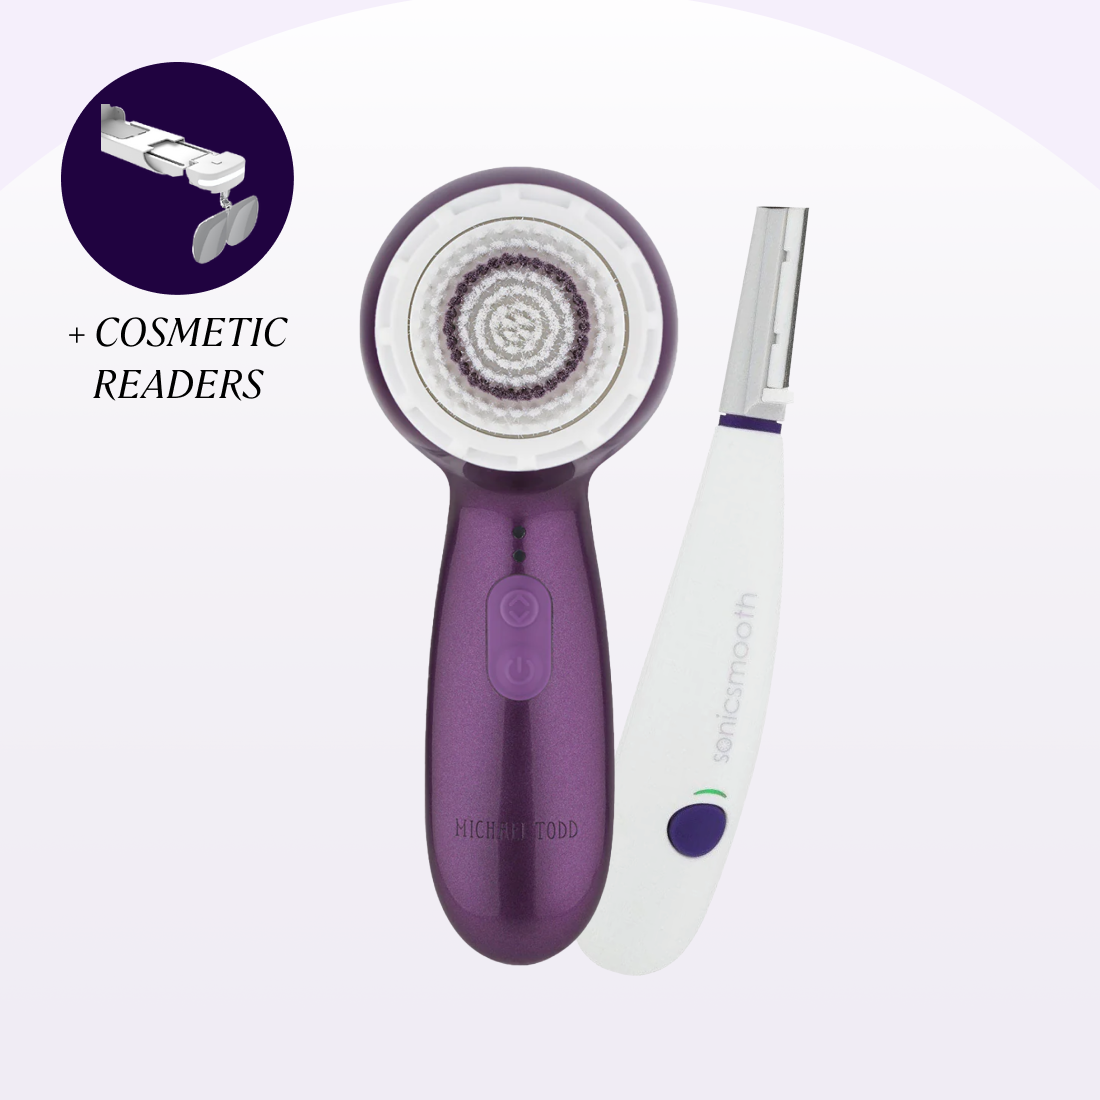 A purple device with a white Sonicsmooth handle.
Product: 2-Piece Best Sellers Kit by Michael Todd Beauty.